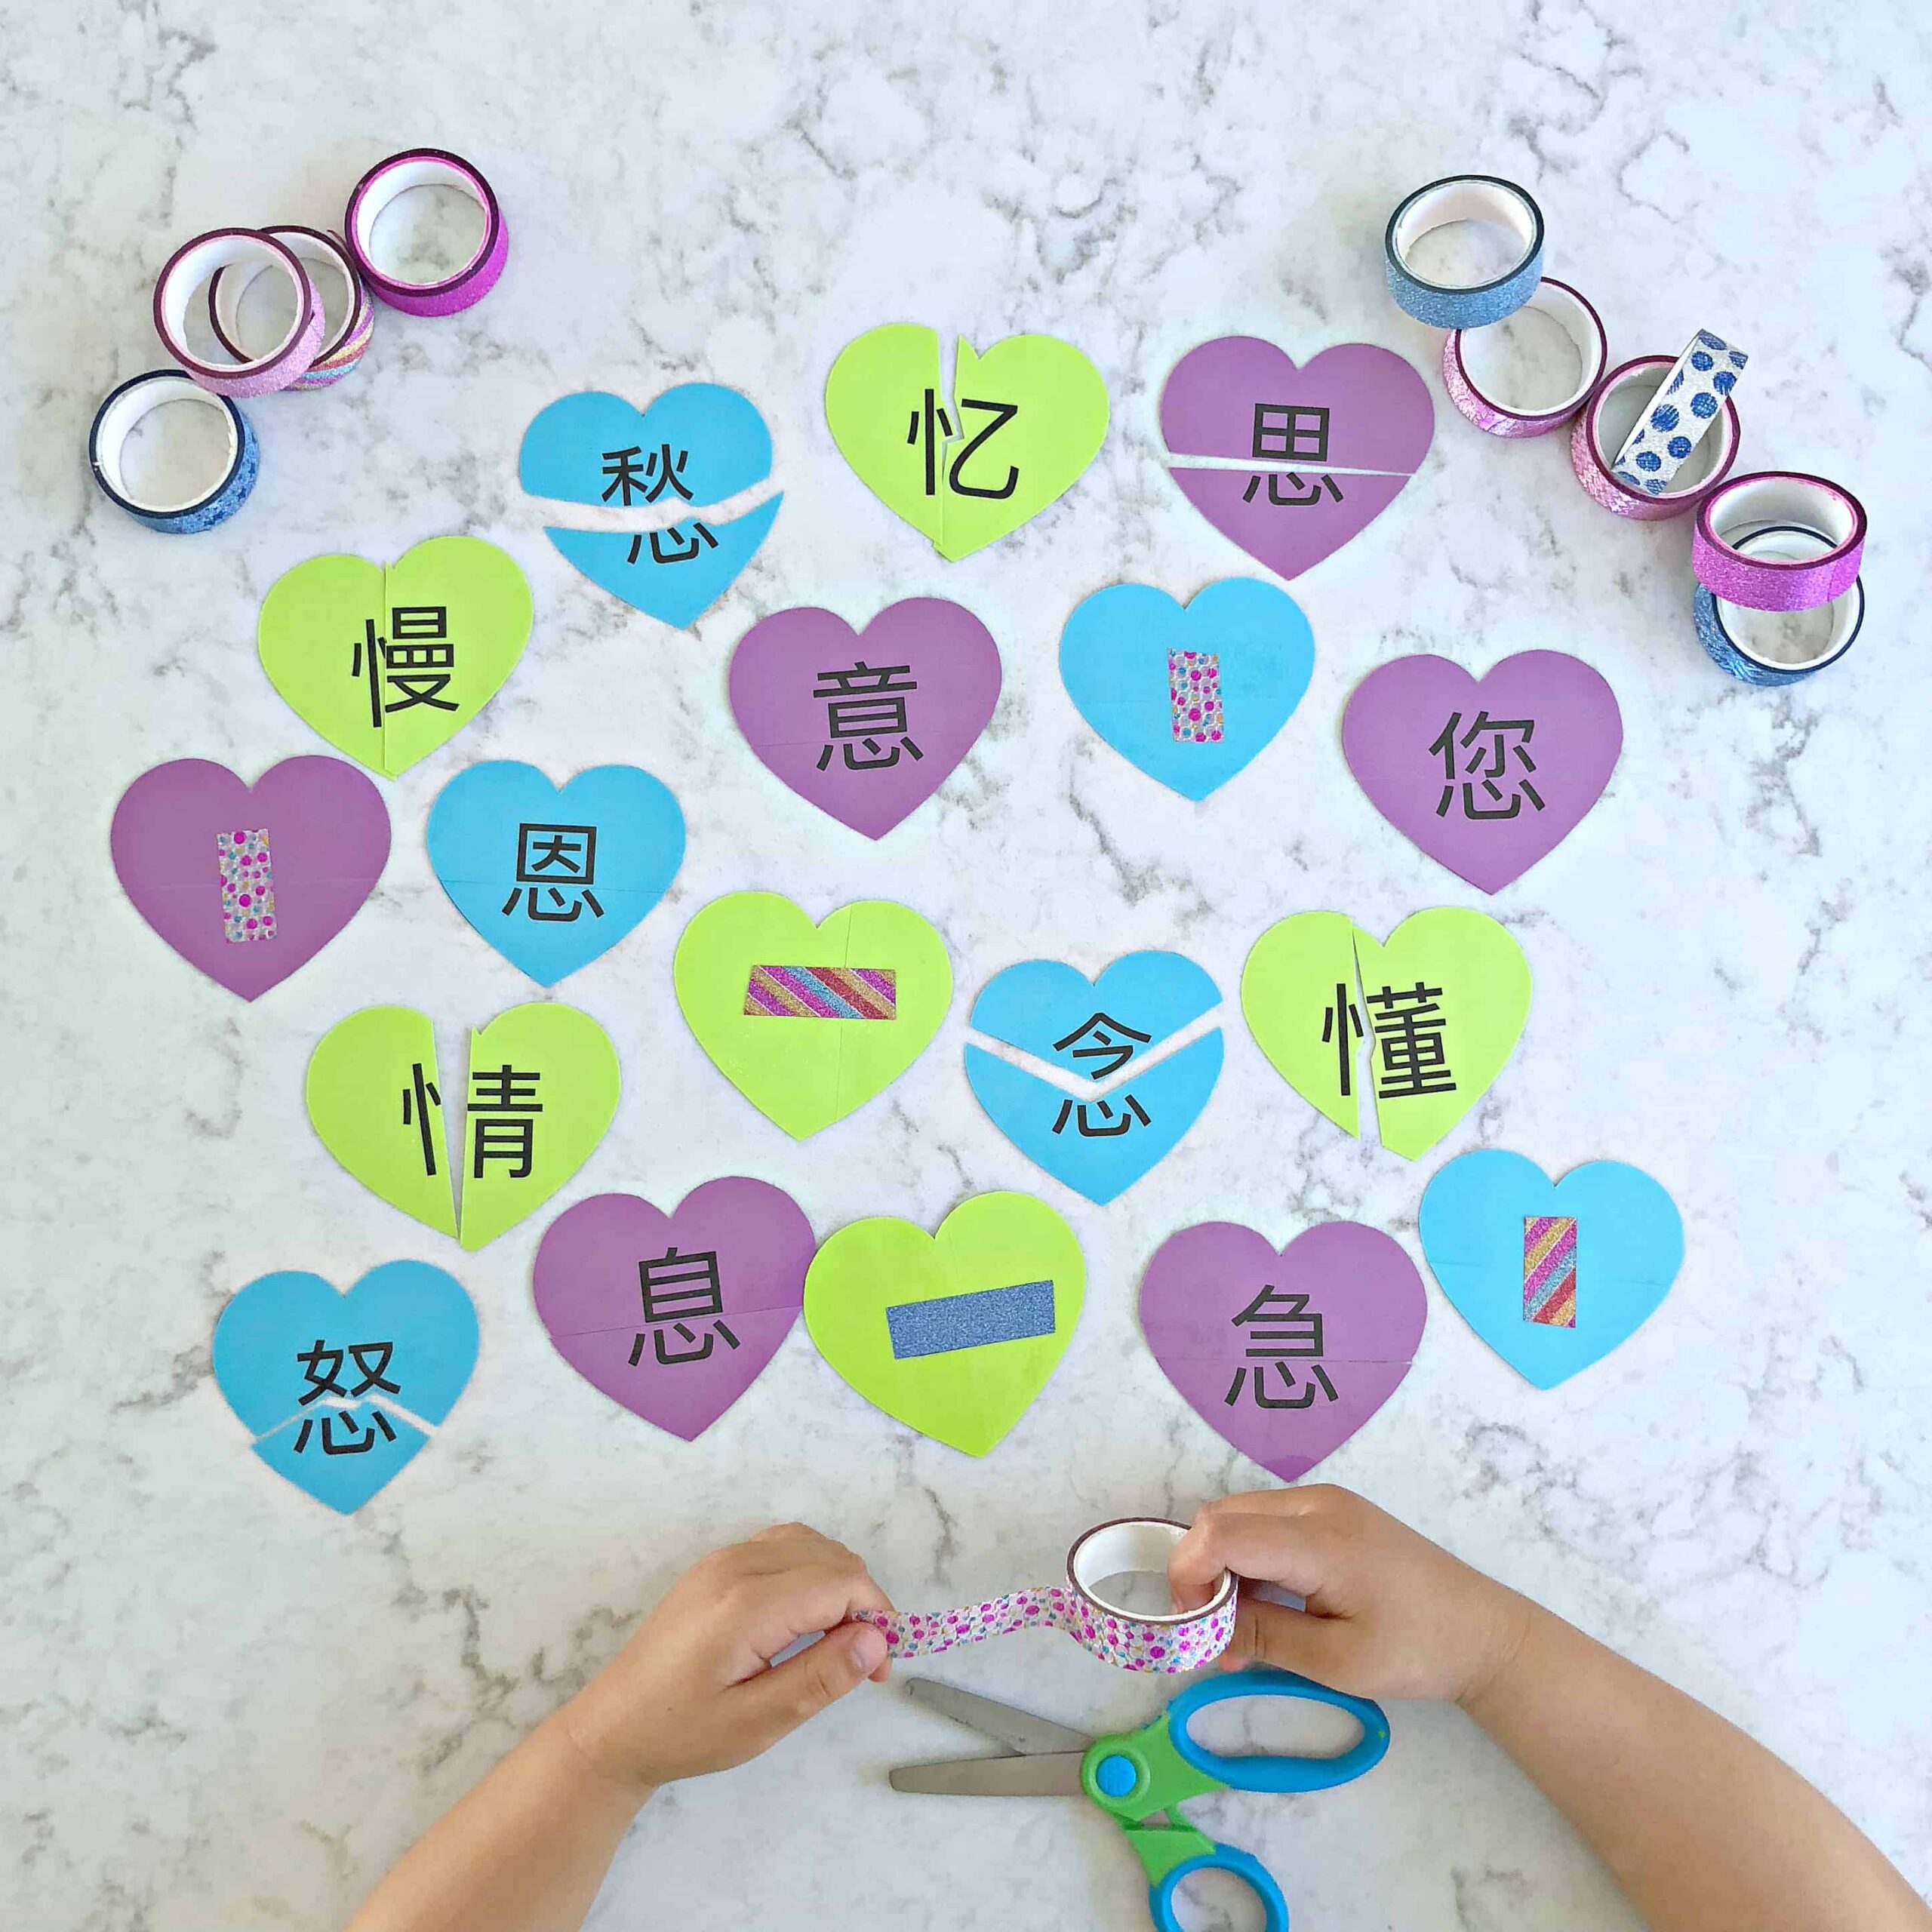 Learn Chinese Heart Radical Words with Heart Puzzles and Washi Tape!